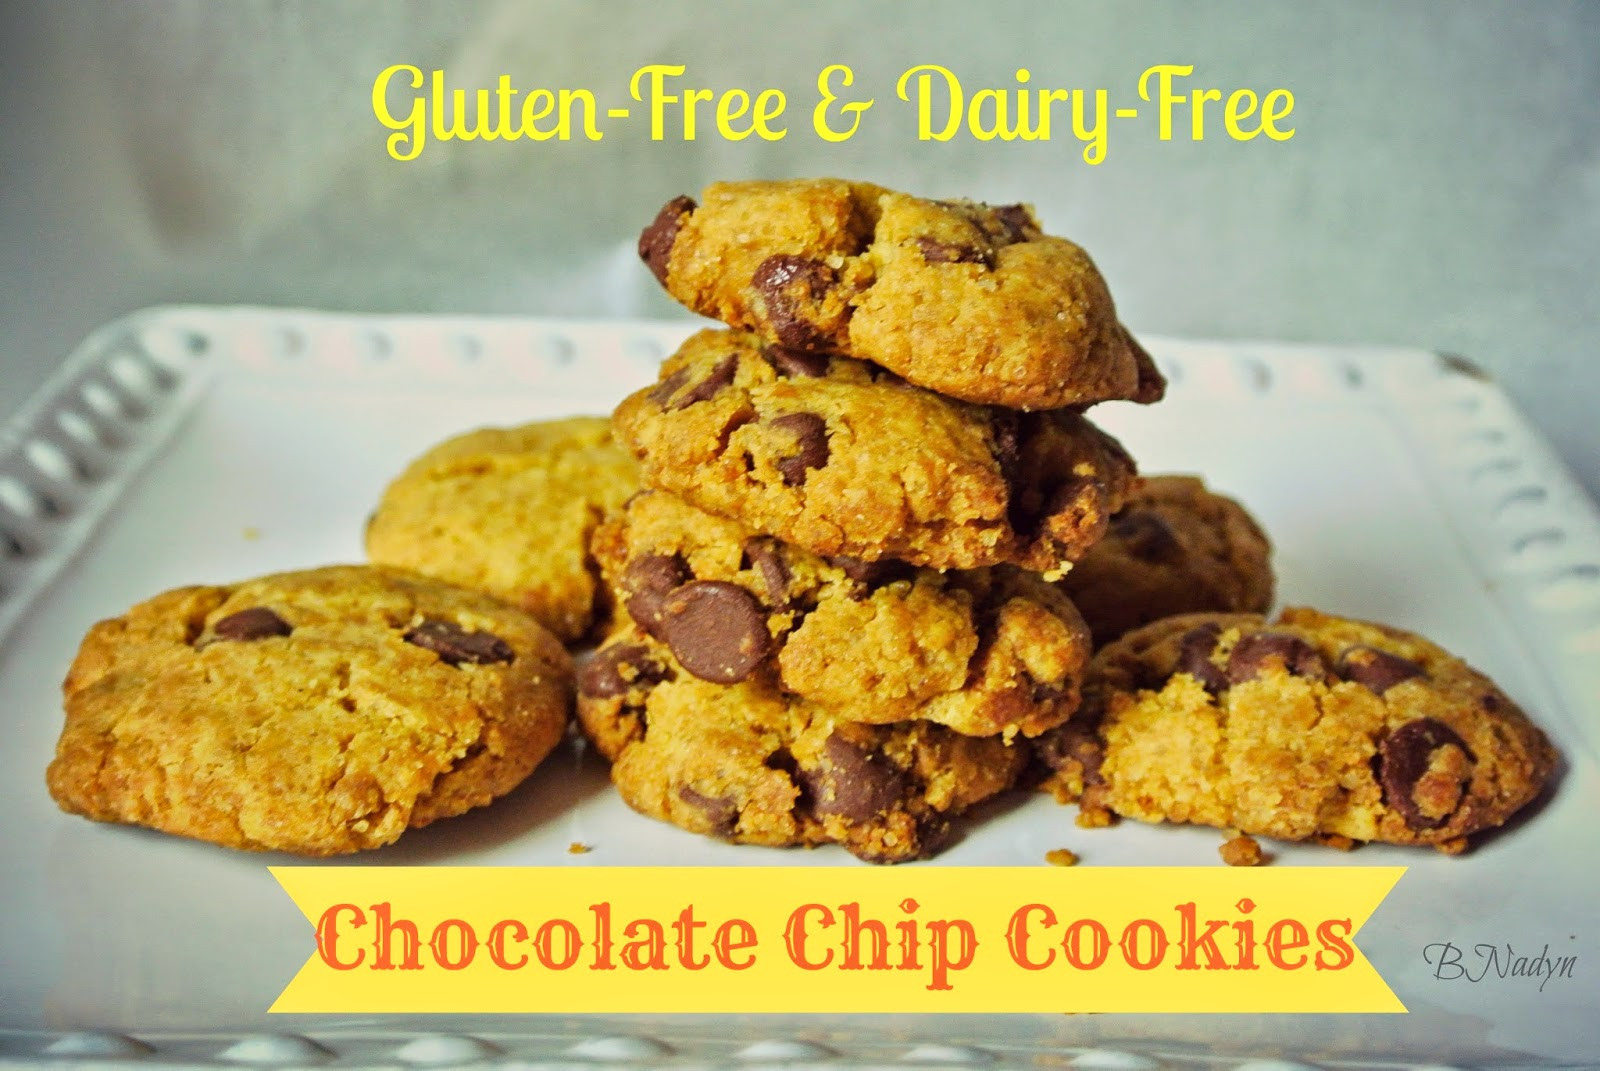 Gluten And Dairy Free Chocolate Chip Cookies B is 4 Brody s Gluten Free Dairy Free Chocolate Chip Cookies